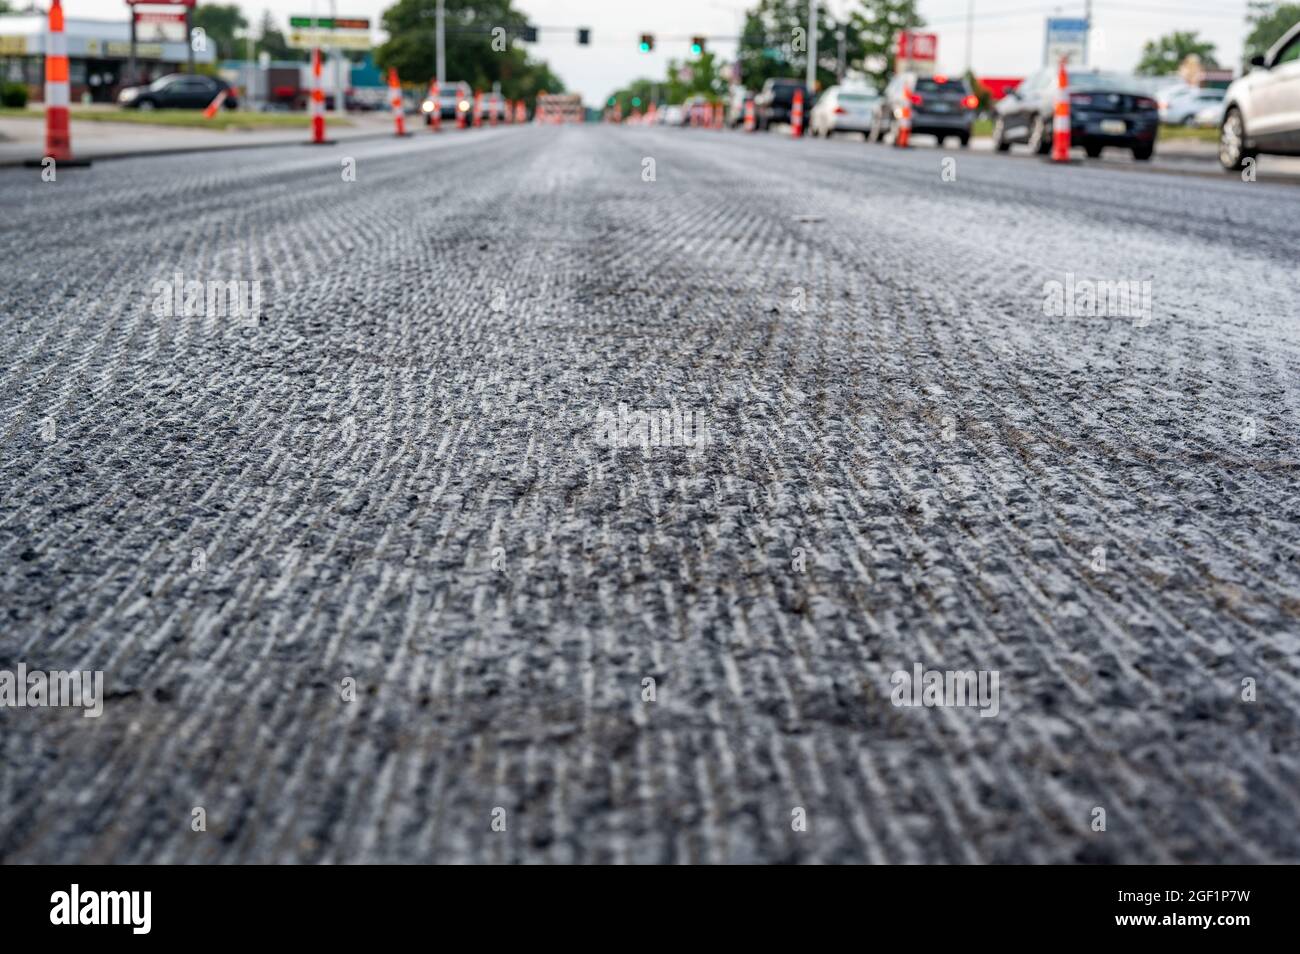 Low angle shot across a scarified street under construction with lanes on either side blocked off. Stock Photo